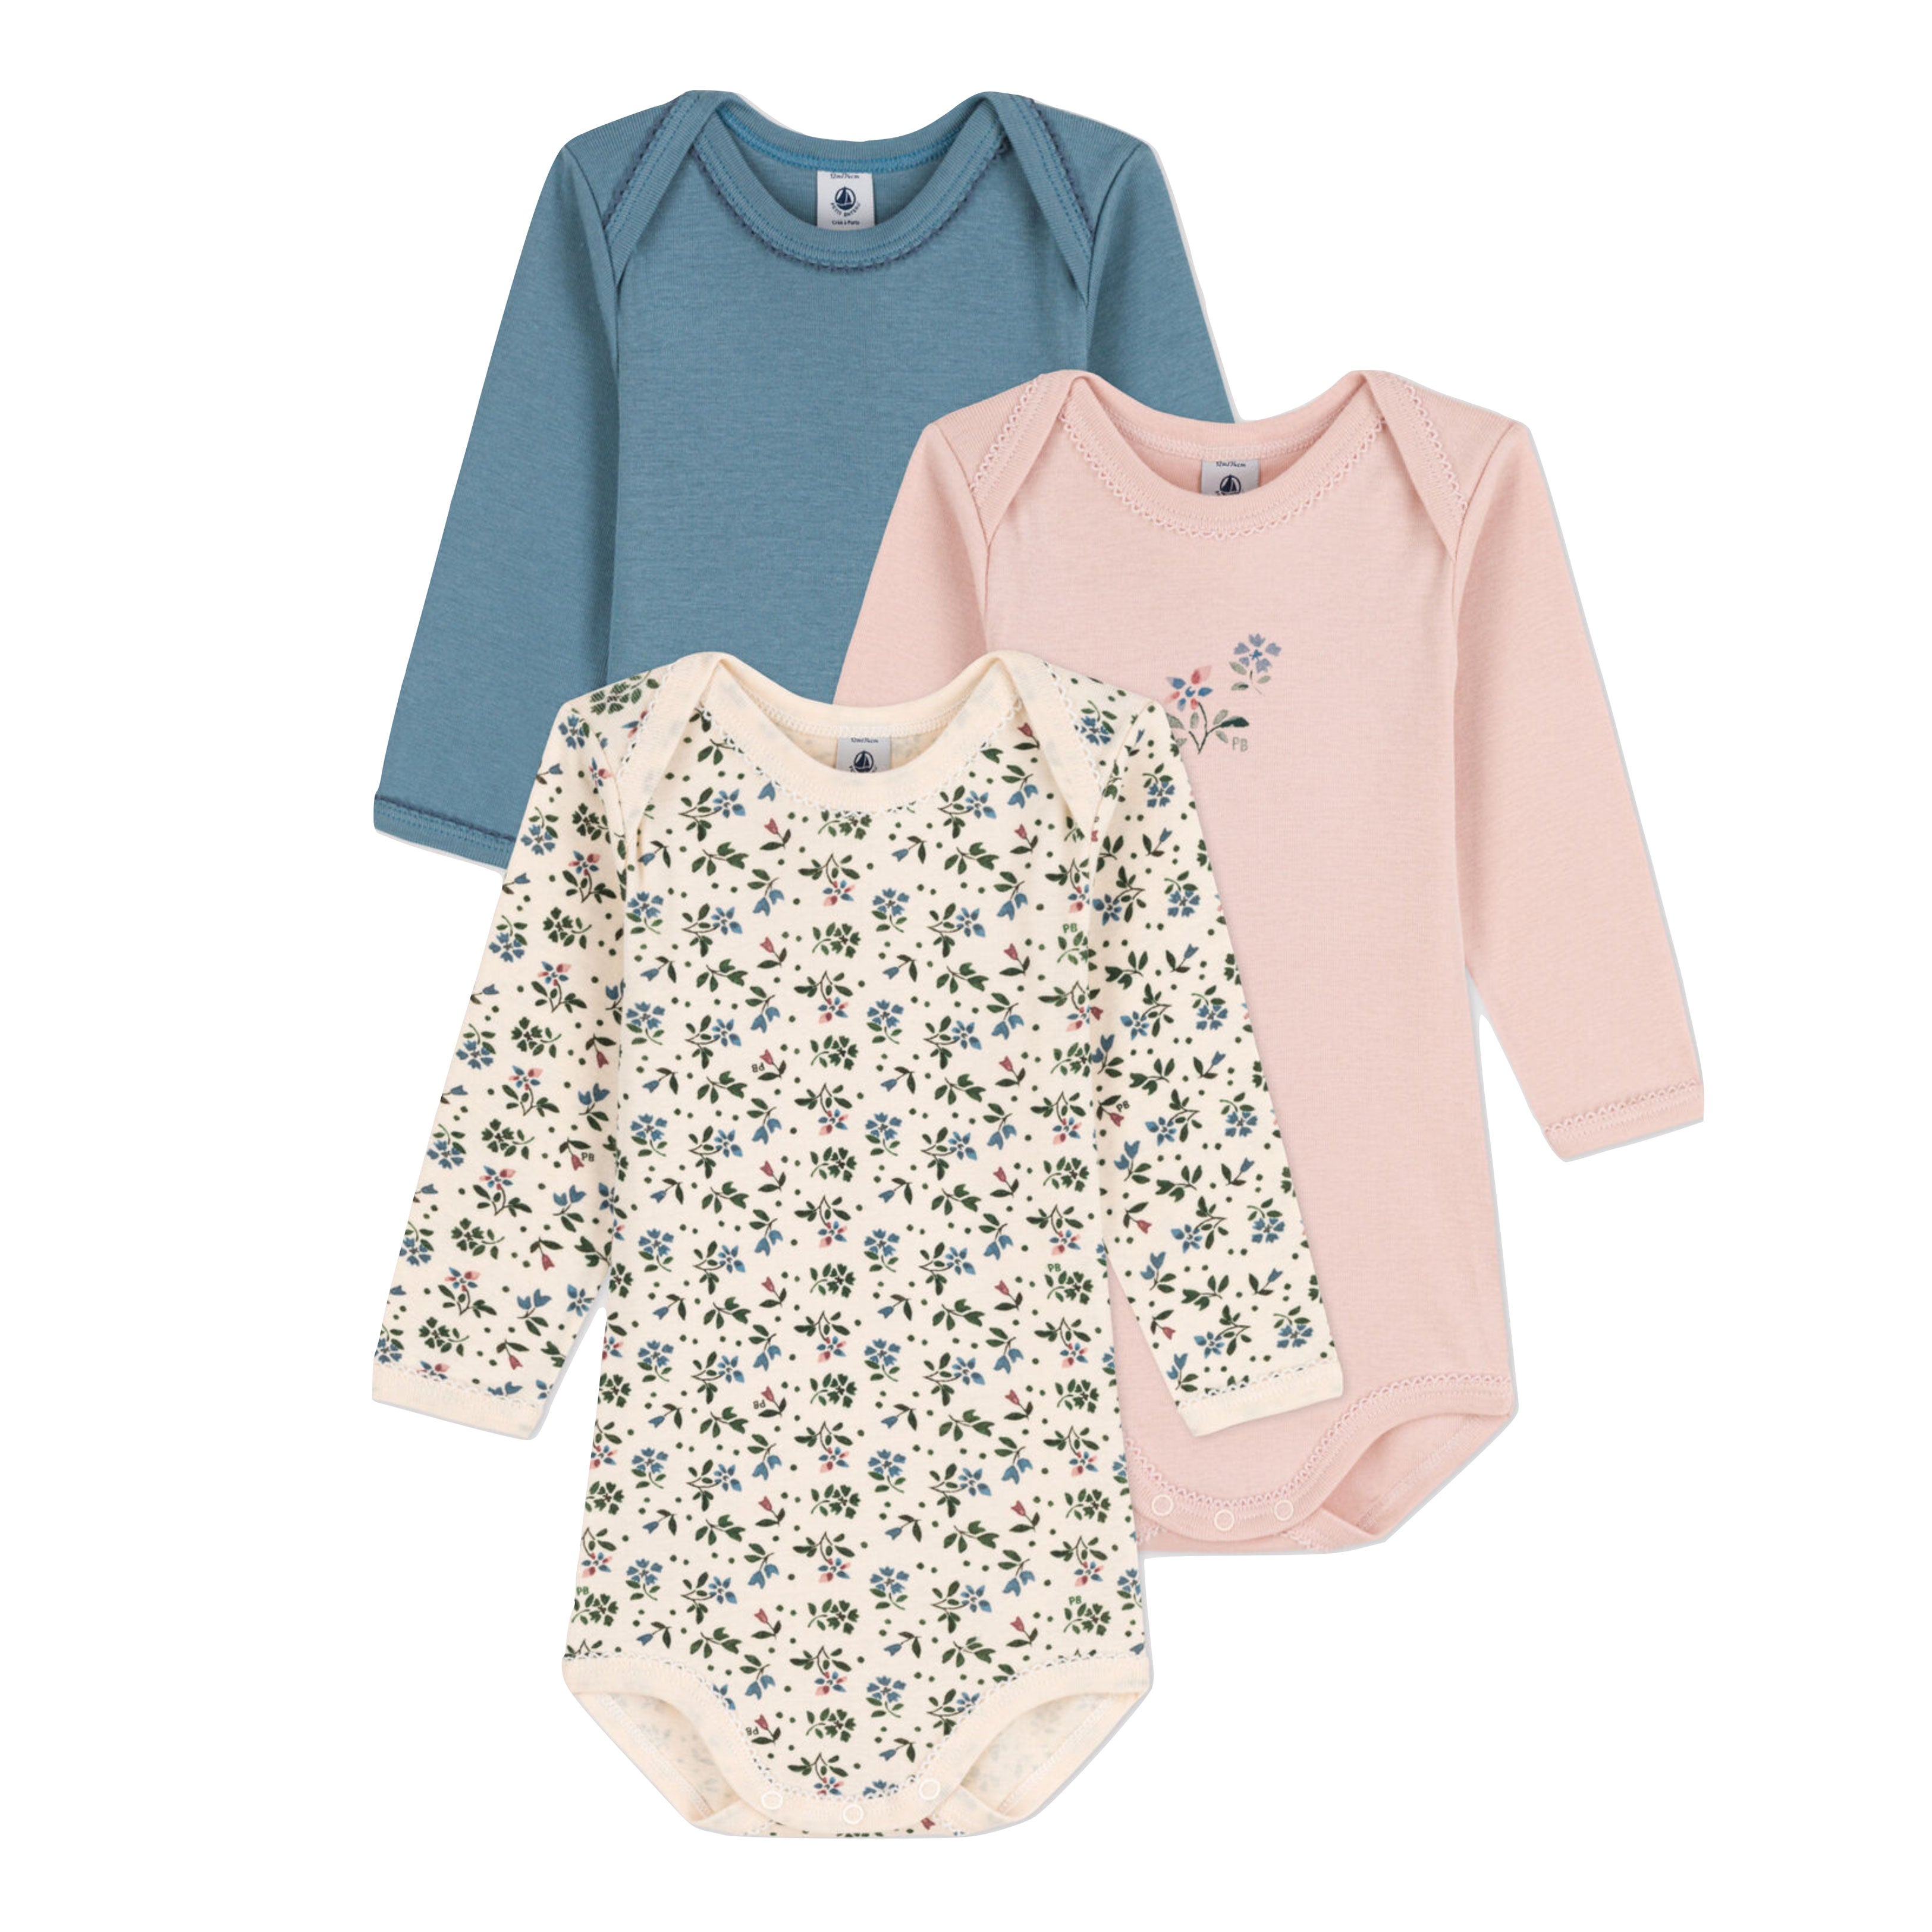 Organic cotton set of 3 baby girl onesies by Petit Bateau at Bonjour Baby Baskets